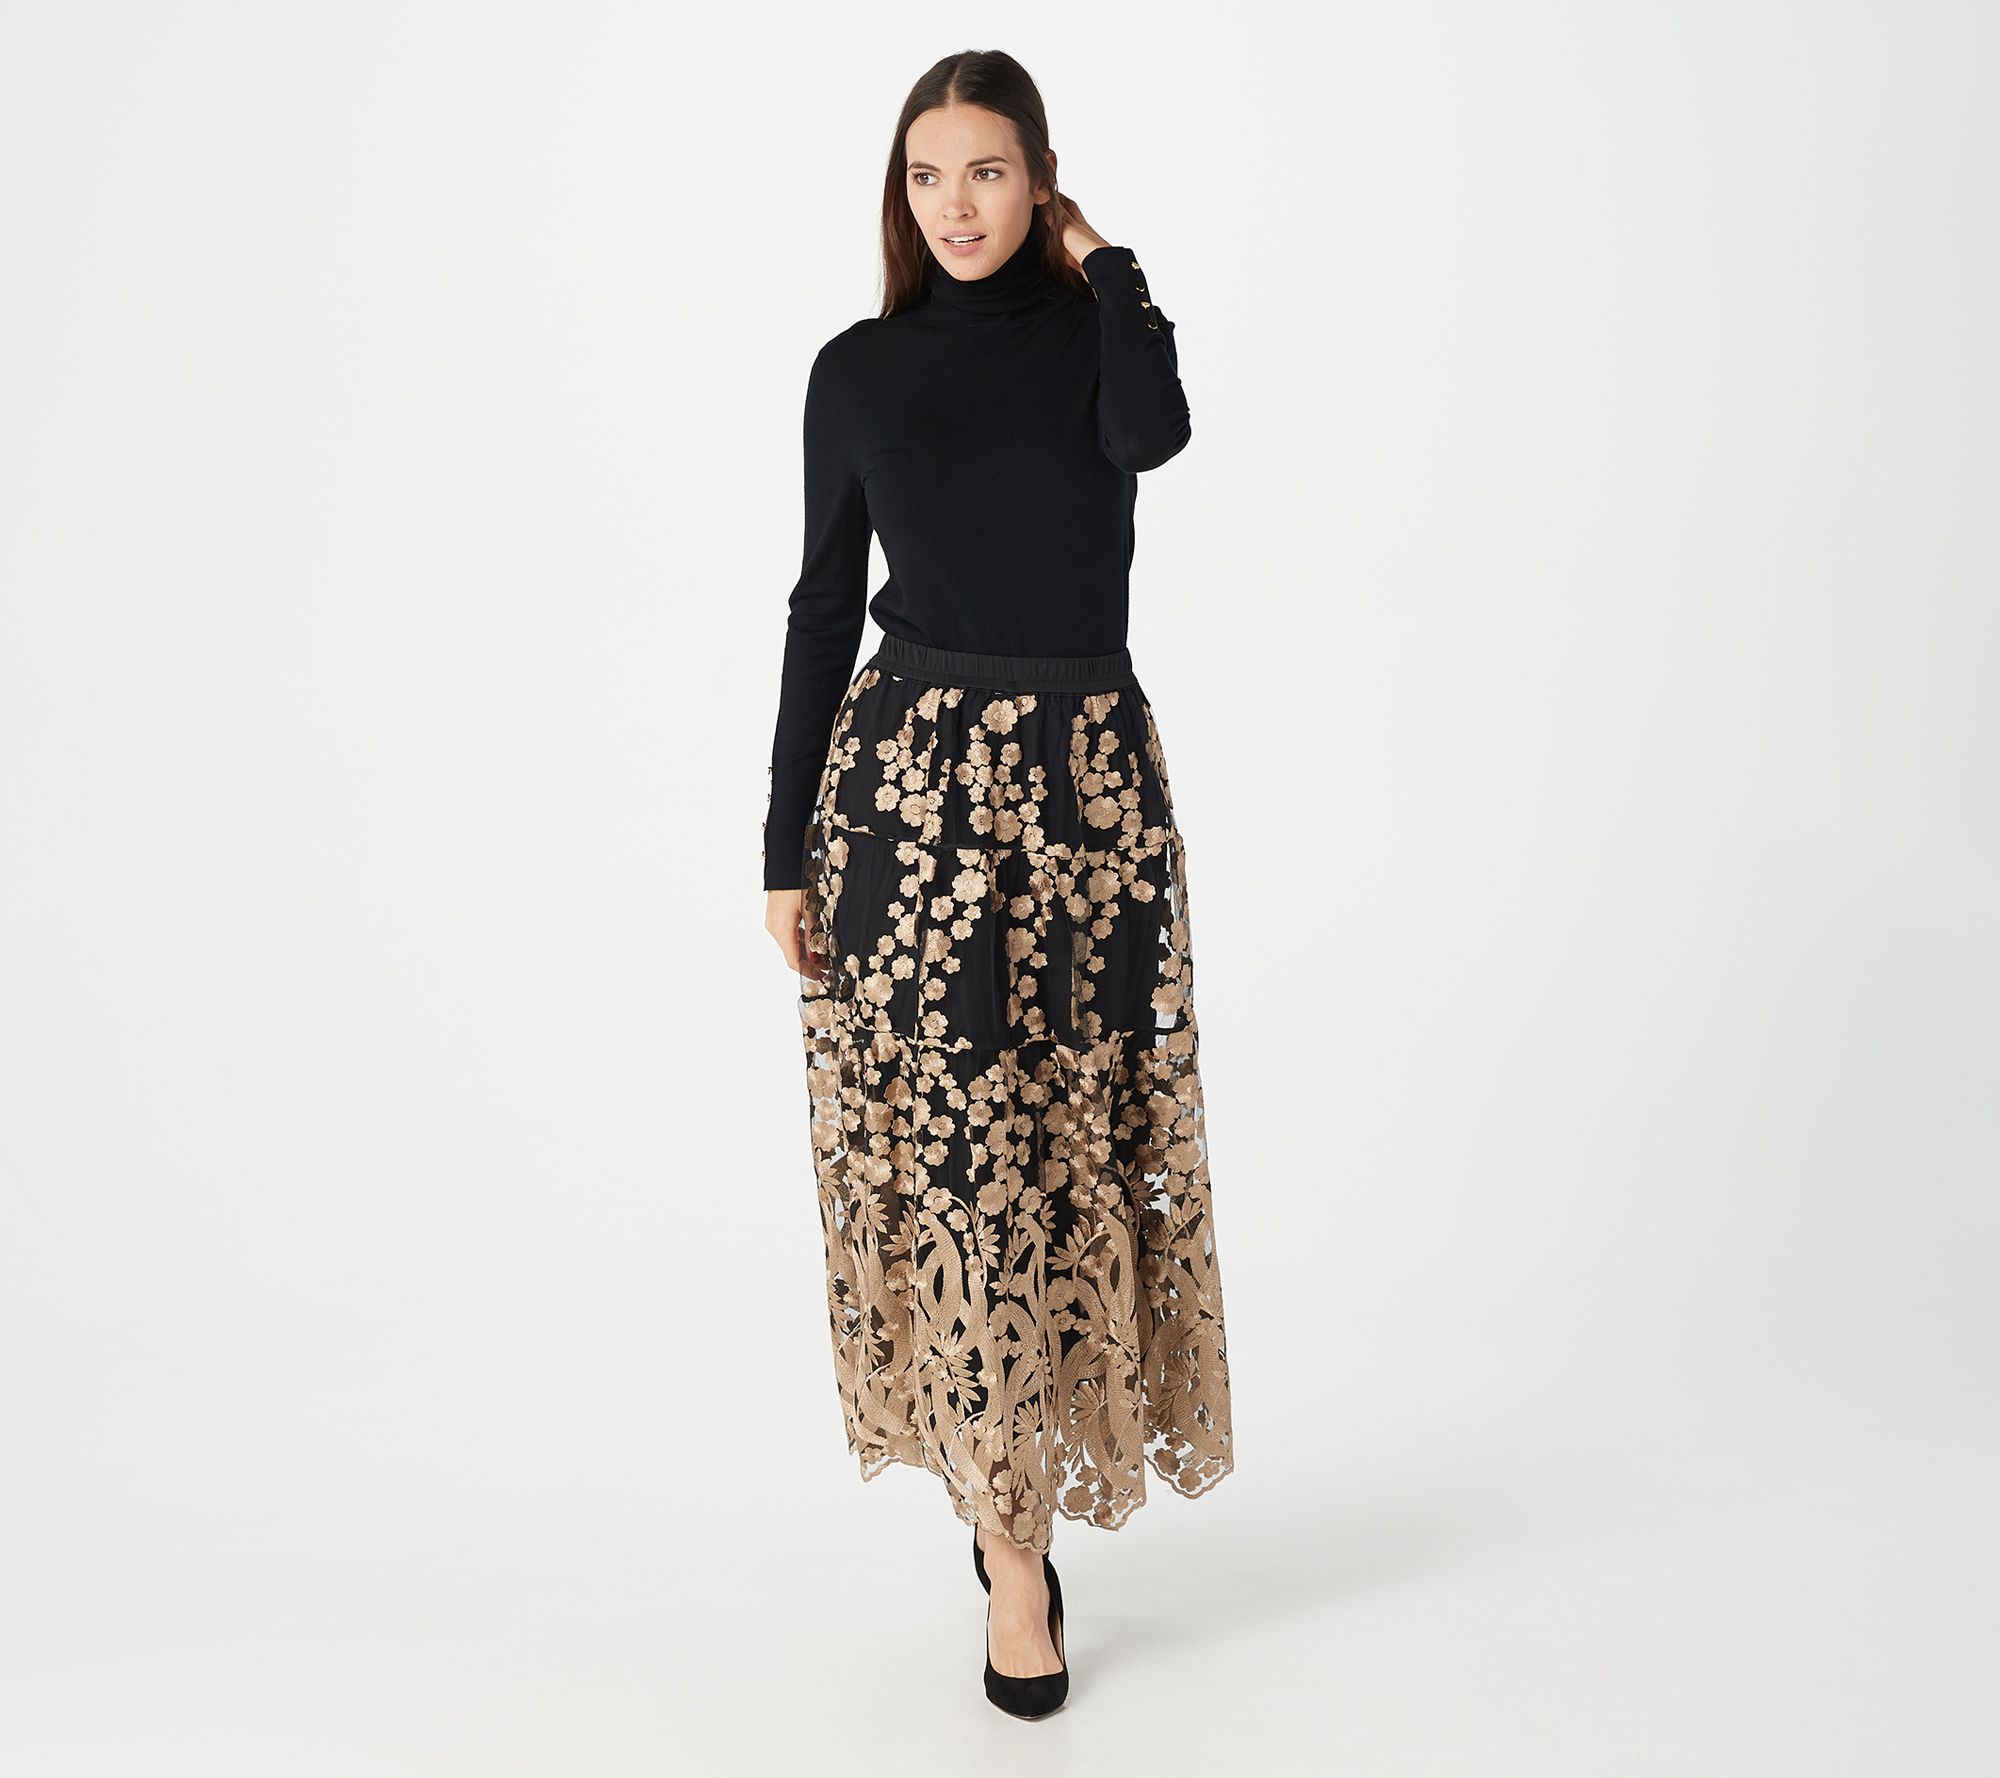 Linea by Louis Dell'Olio Regular Embroidered Skirt - QVC.com